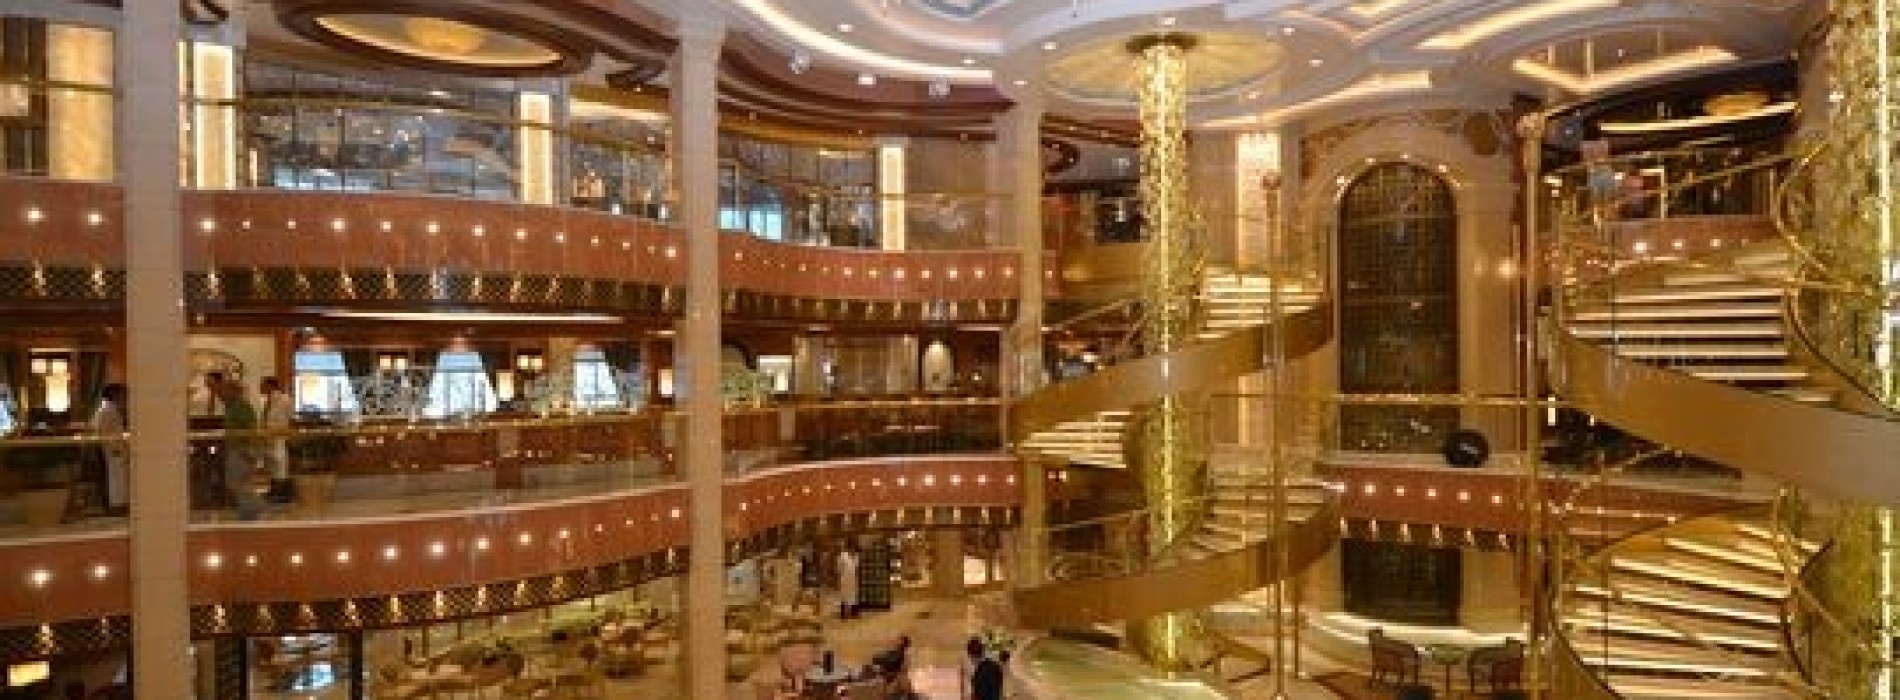 5 Things to love about the New Regal Princess